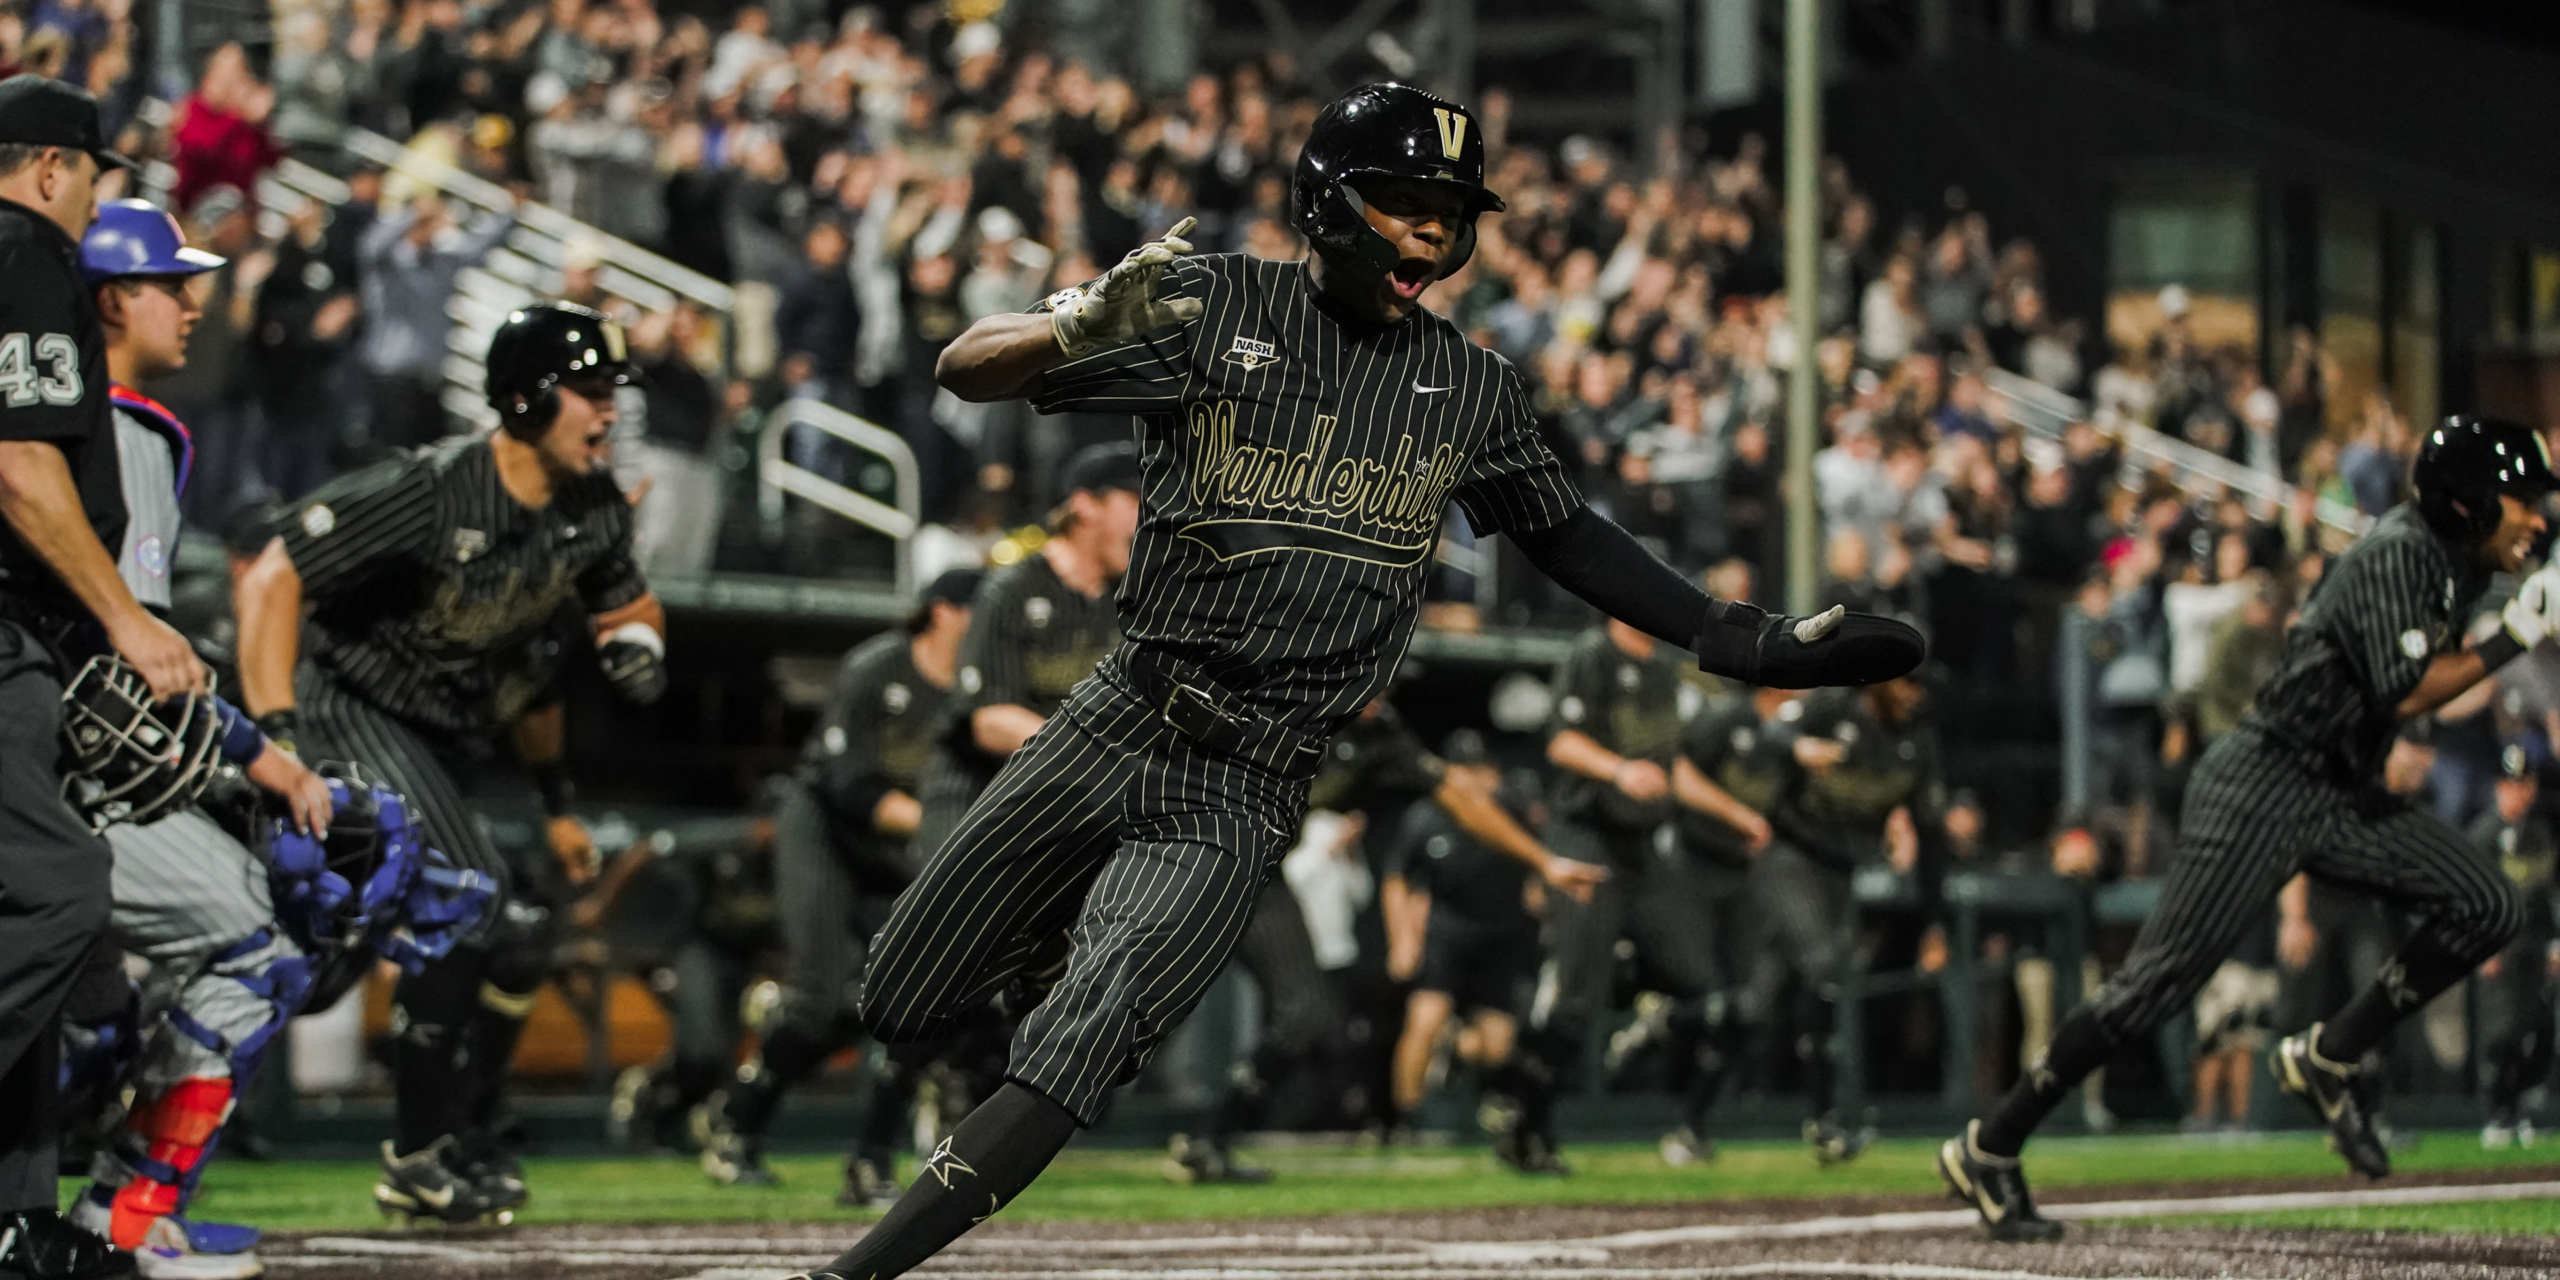 Vanderbilt Baseball Stays Undefeated In SEC, Winning 17 Of Their Last 18  Games - The Sports Credential